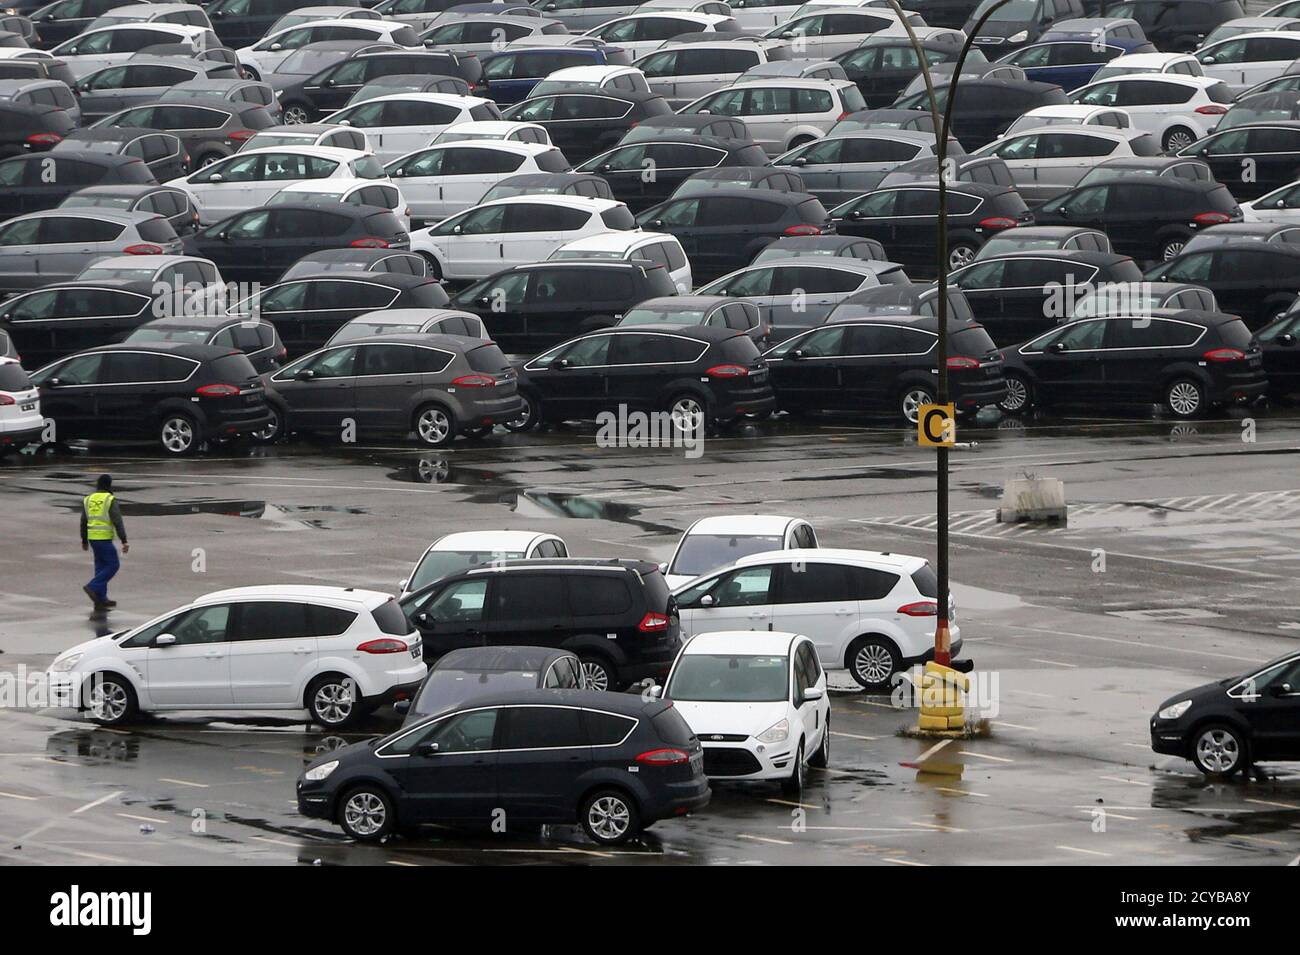 A worker walks by Ford vehicles in a parking lot at the Ford assembly plant in Genk December 17, 2014. In the heart of western Europe, the Belgian-Dutch-German rust belt has been dealt another blow. Two car plants closed this month as companies sought cheaper labour elsewhere, the final chapter of a manufacturing boom that began when coal mines fuelling Europe's industrialisation shut in the 1960s. Now the region straddling three borders is trying to reinvent itself. A 315 billion euro EU investment plan, announced on Thursday, is the latest potential help. It aims to encourage investors to ba Stock Photo